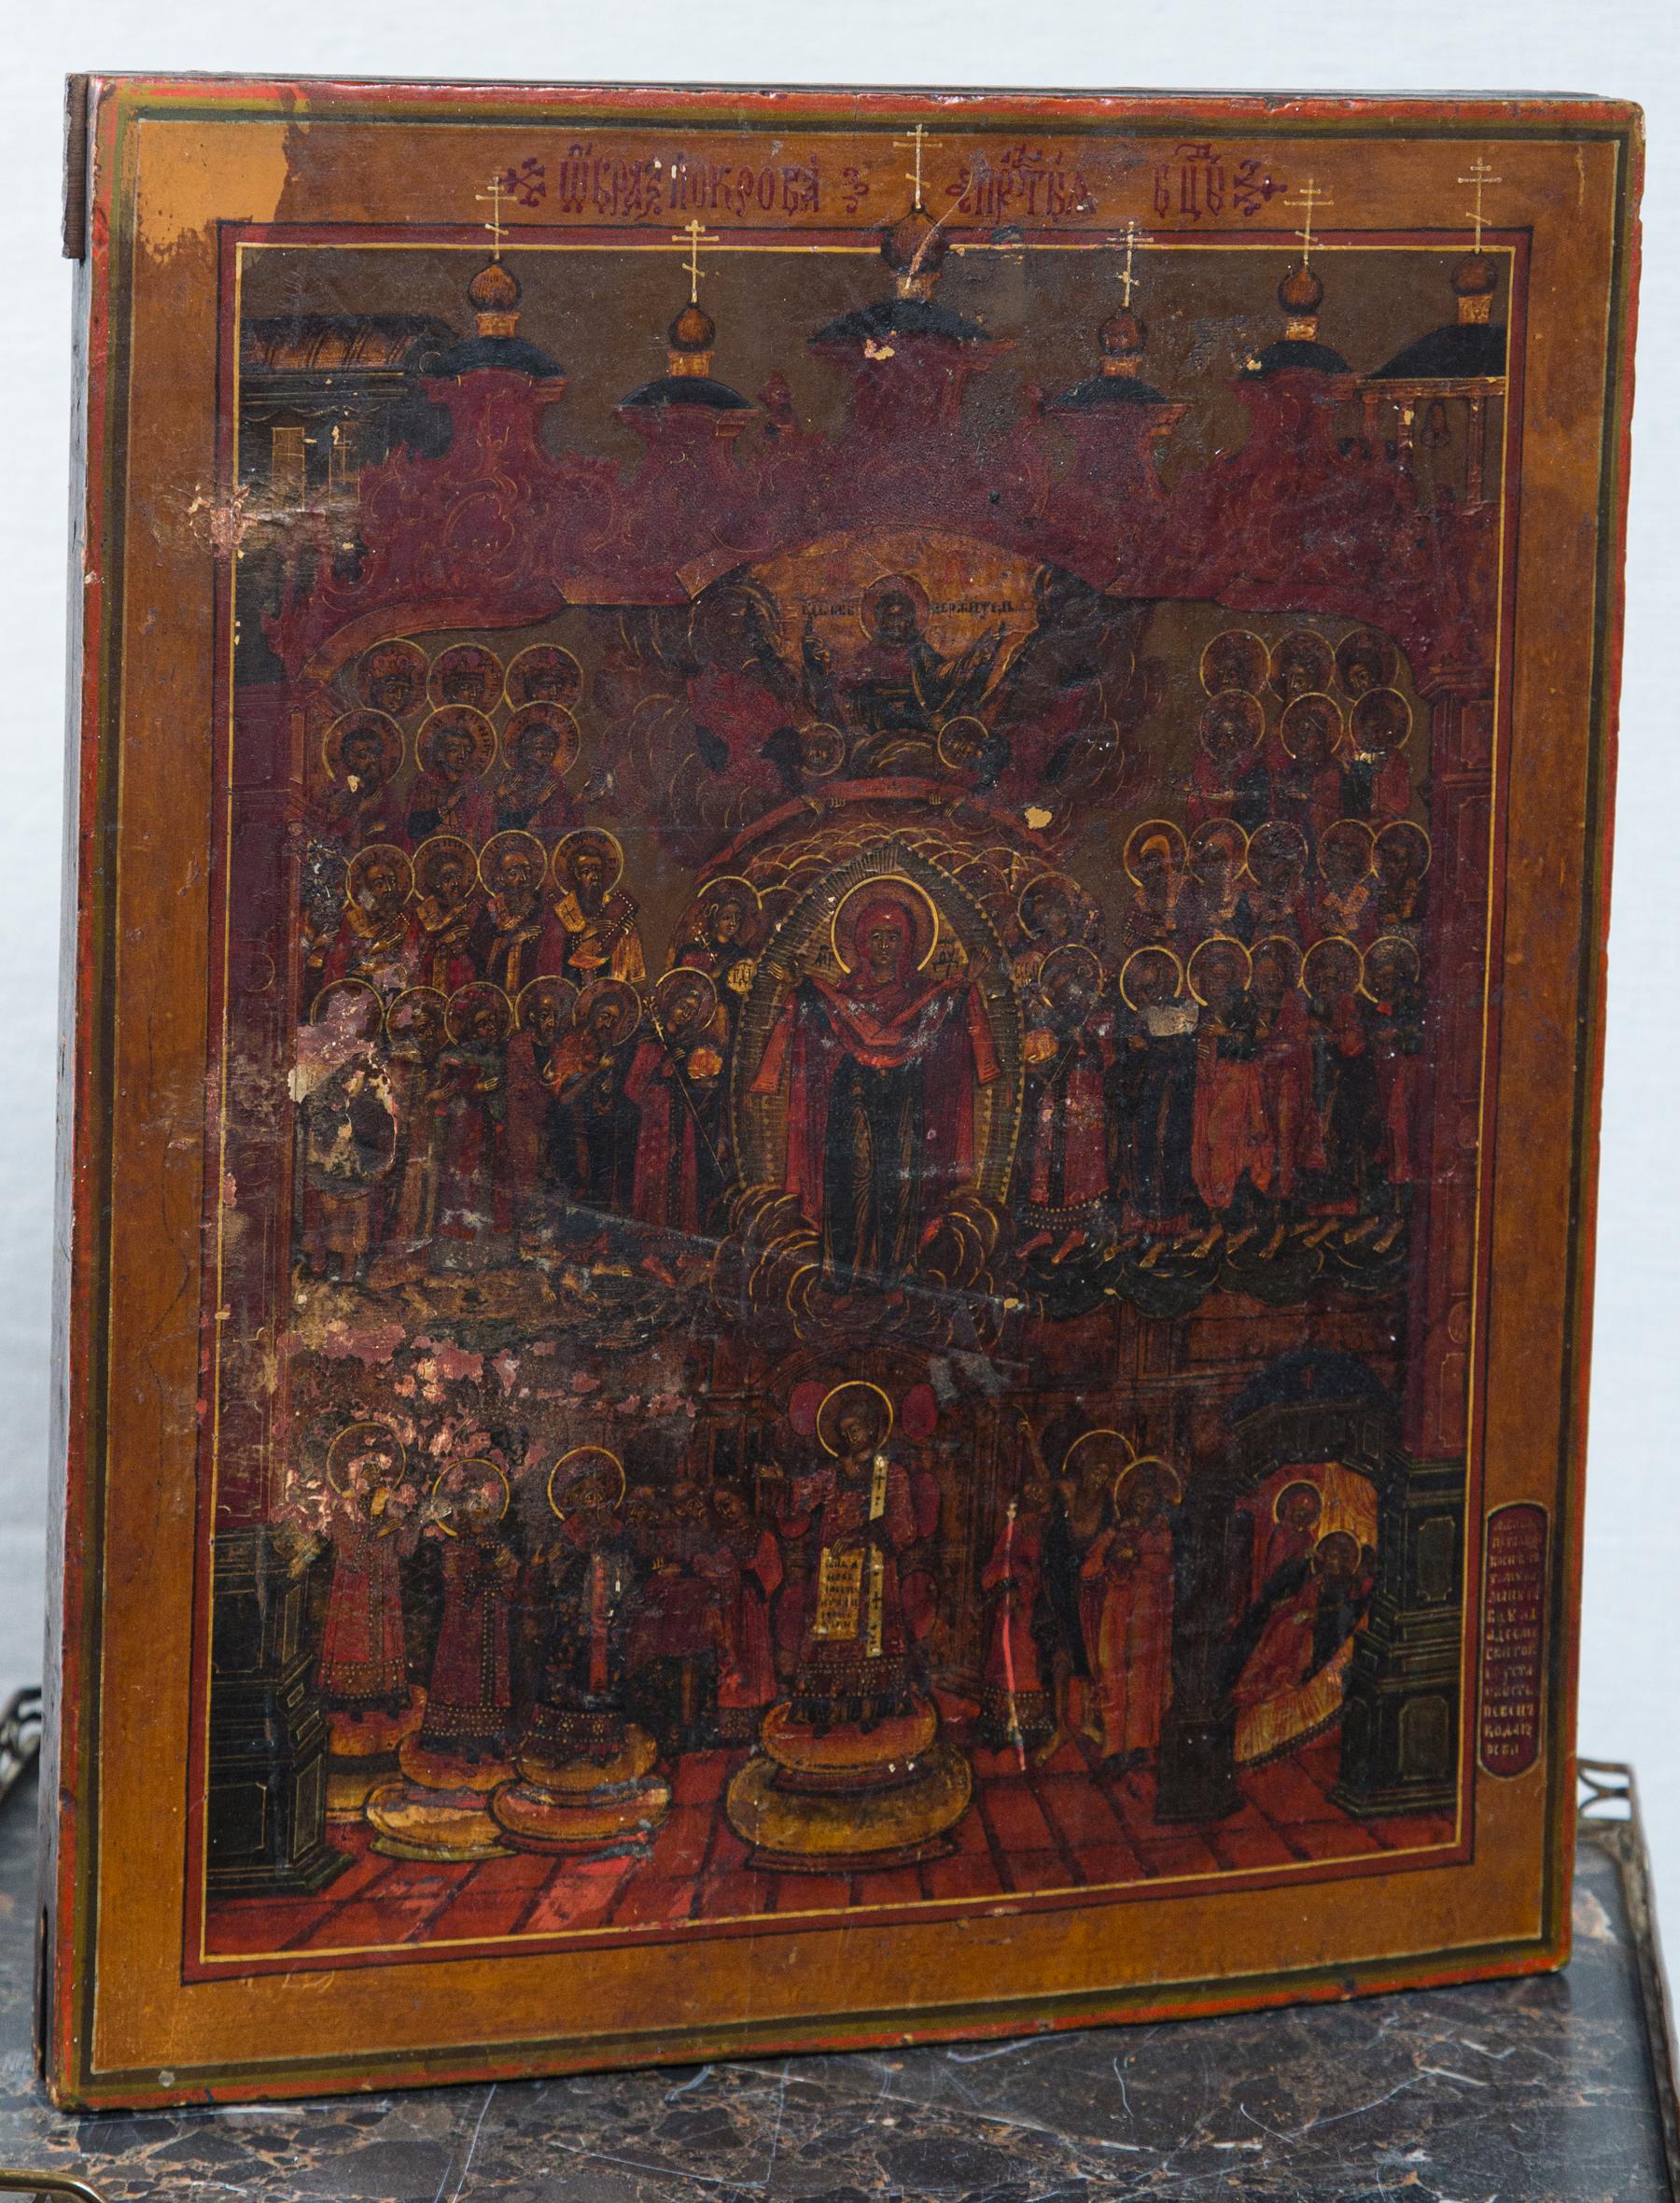 Hand painted on wooden board. Thru the darkened varnish , are visible the hierarchy of the Orthodox Church, from the image of God at the top and the 12 disciples, to the image of Mary in the center, surrounded by followers and saints, and at the